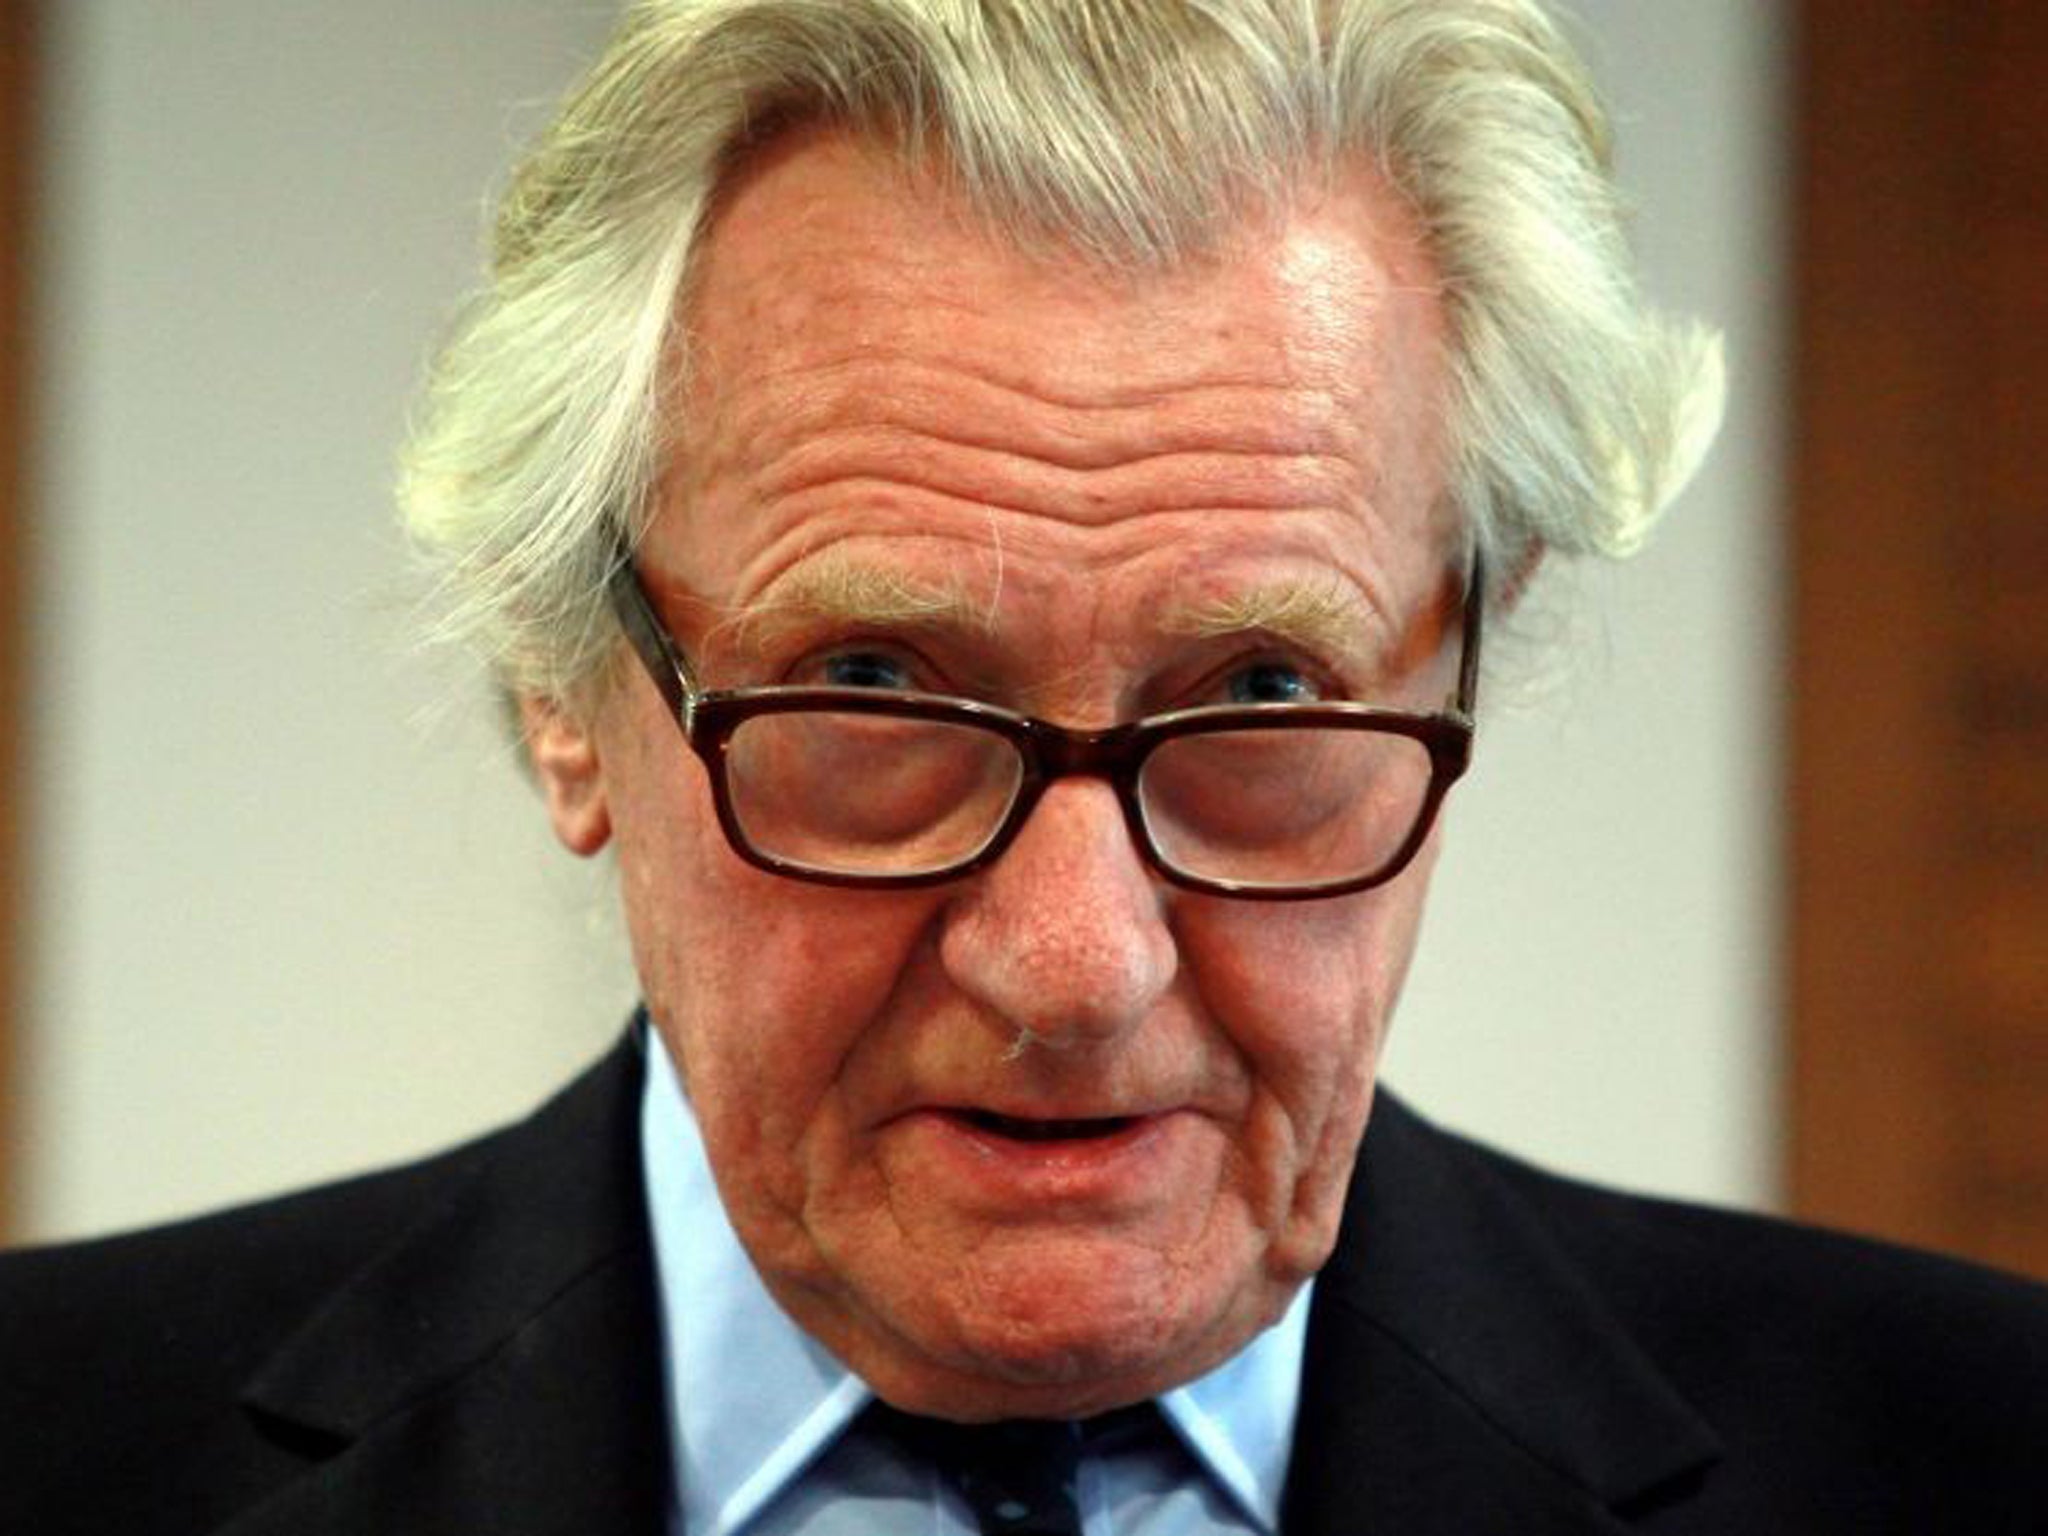 Tory grandee Lord Heseltine has come out firmly in favour of the £50 billion HS2 high-speed rail project